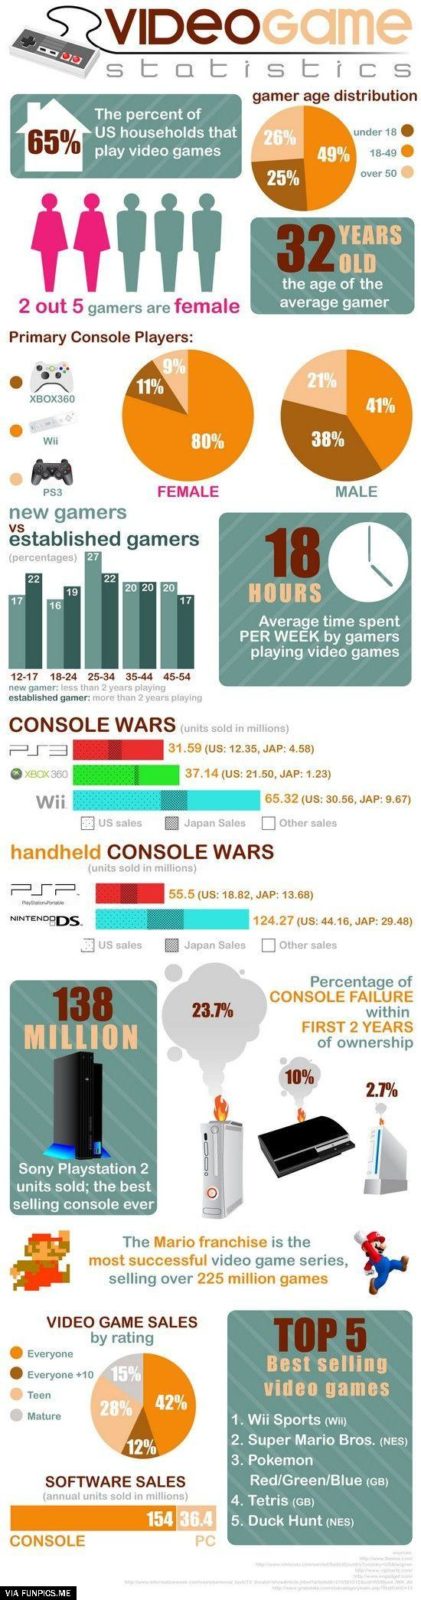 Video game stats